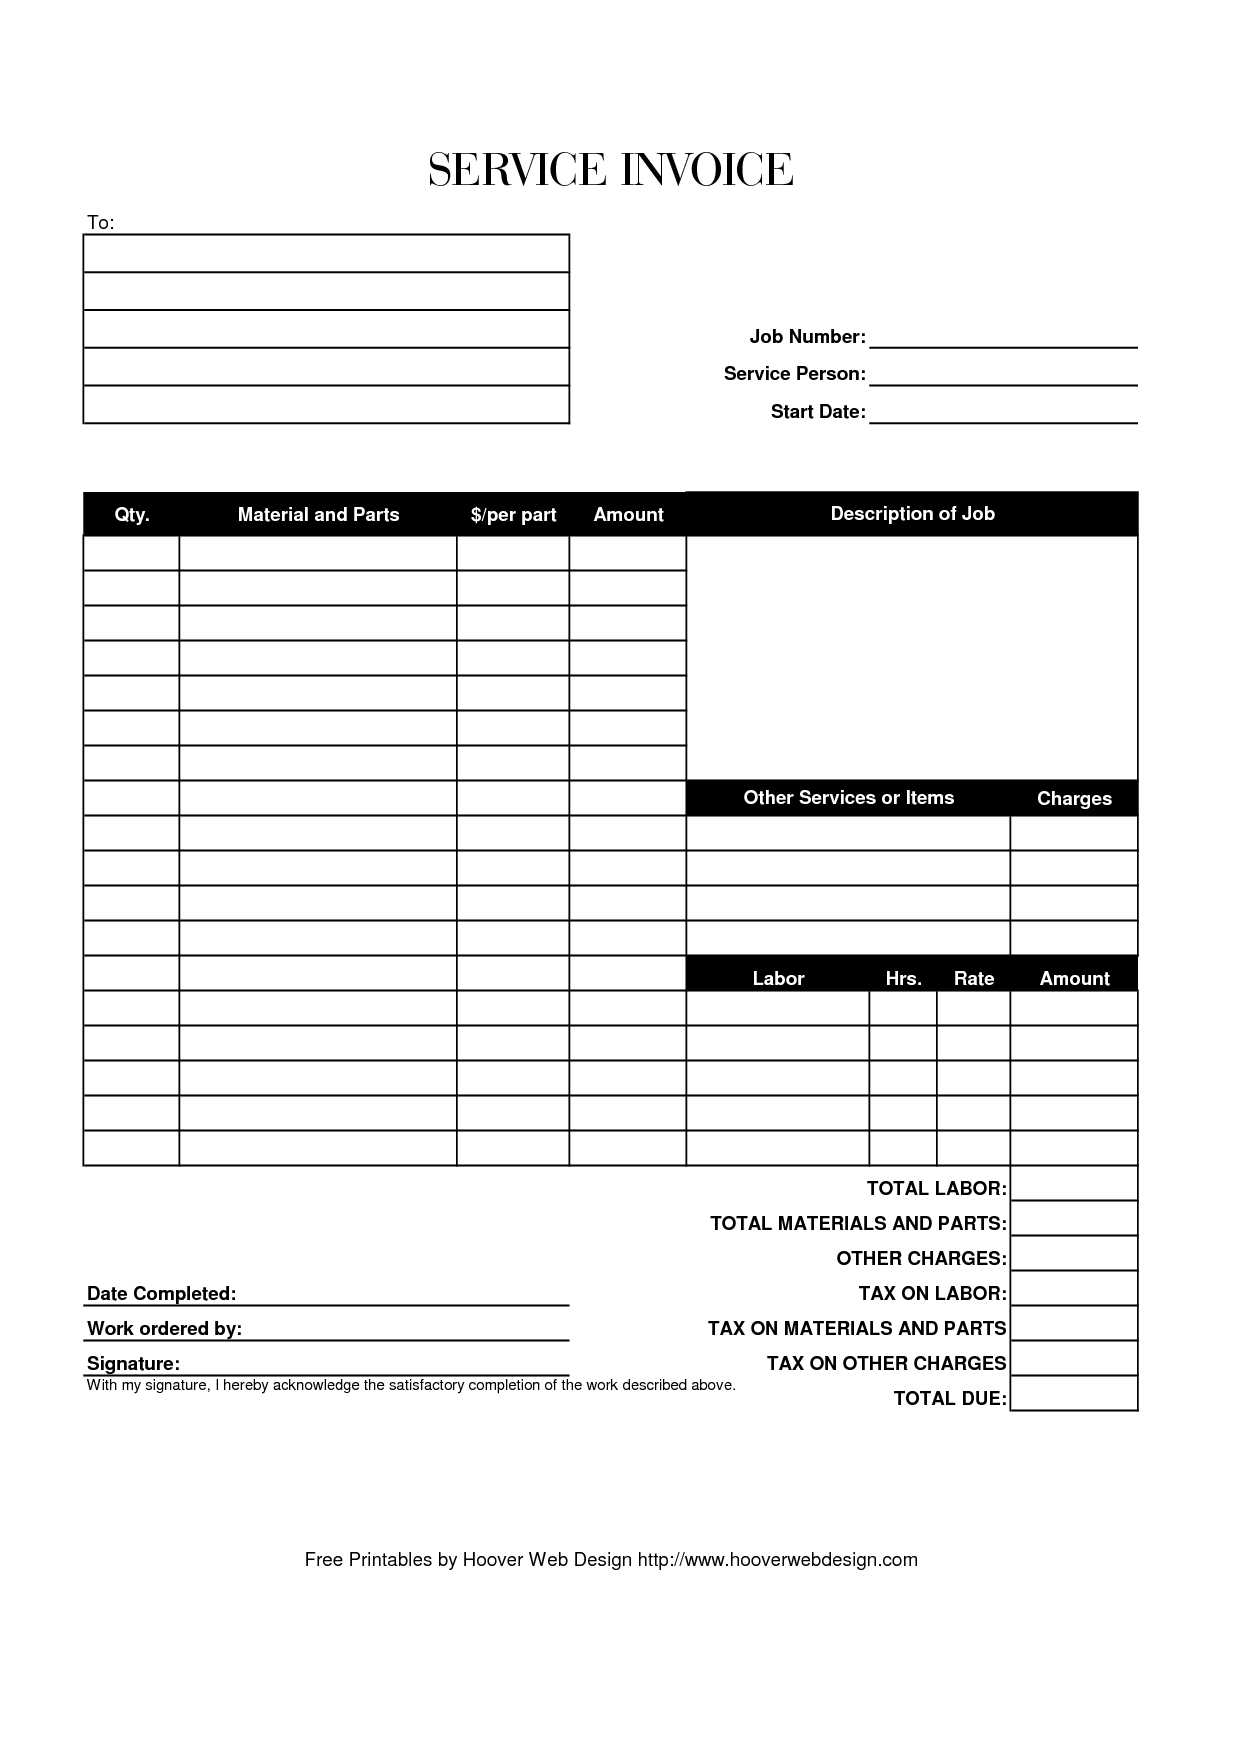 Hoover Receipts | Free Printable Service Invoice Template - Pdf - Free Printable Receipt Template